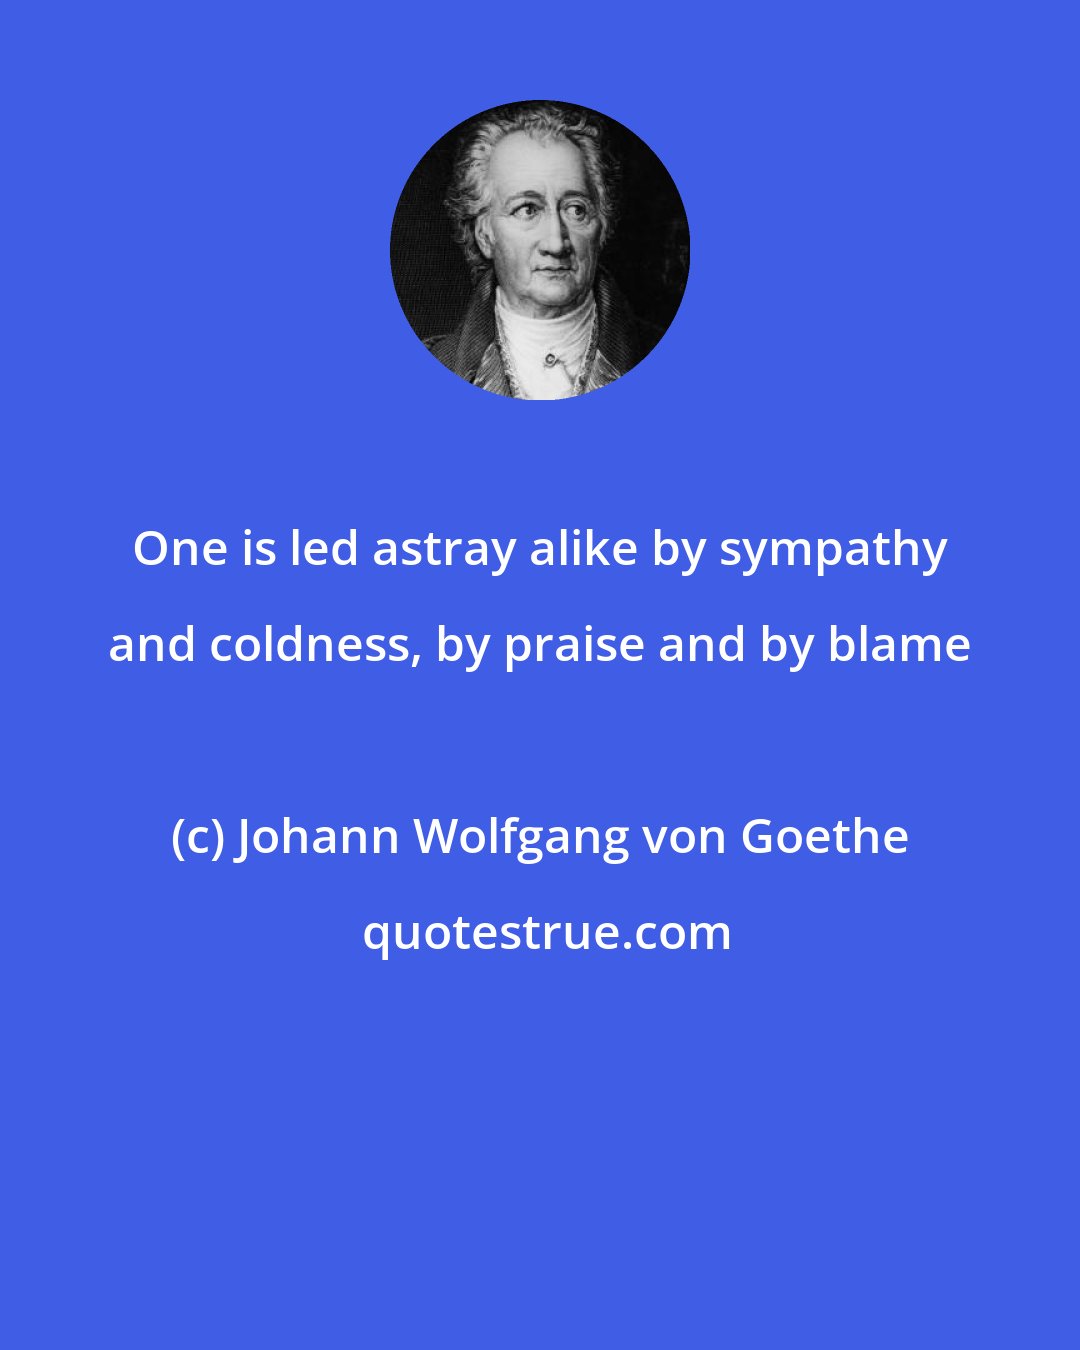 Johann Wolfgang von Goethe: One is led astray alike by sympathy and coldness, by praise and by blame